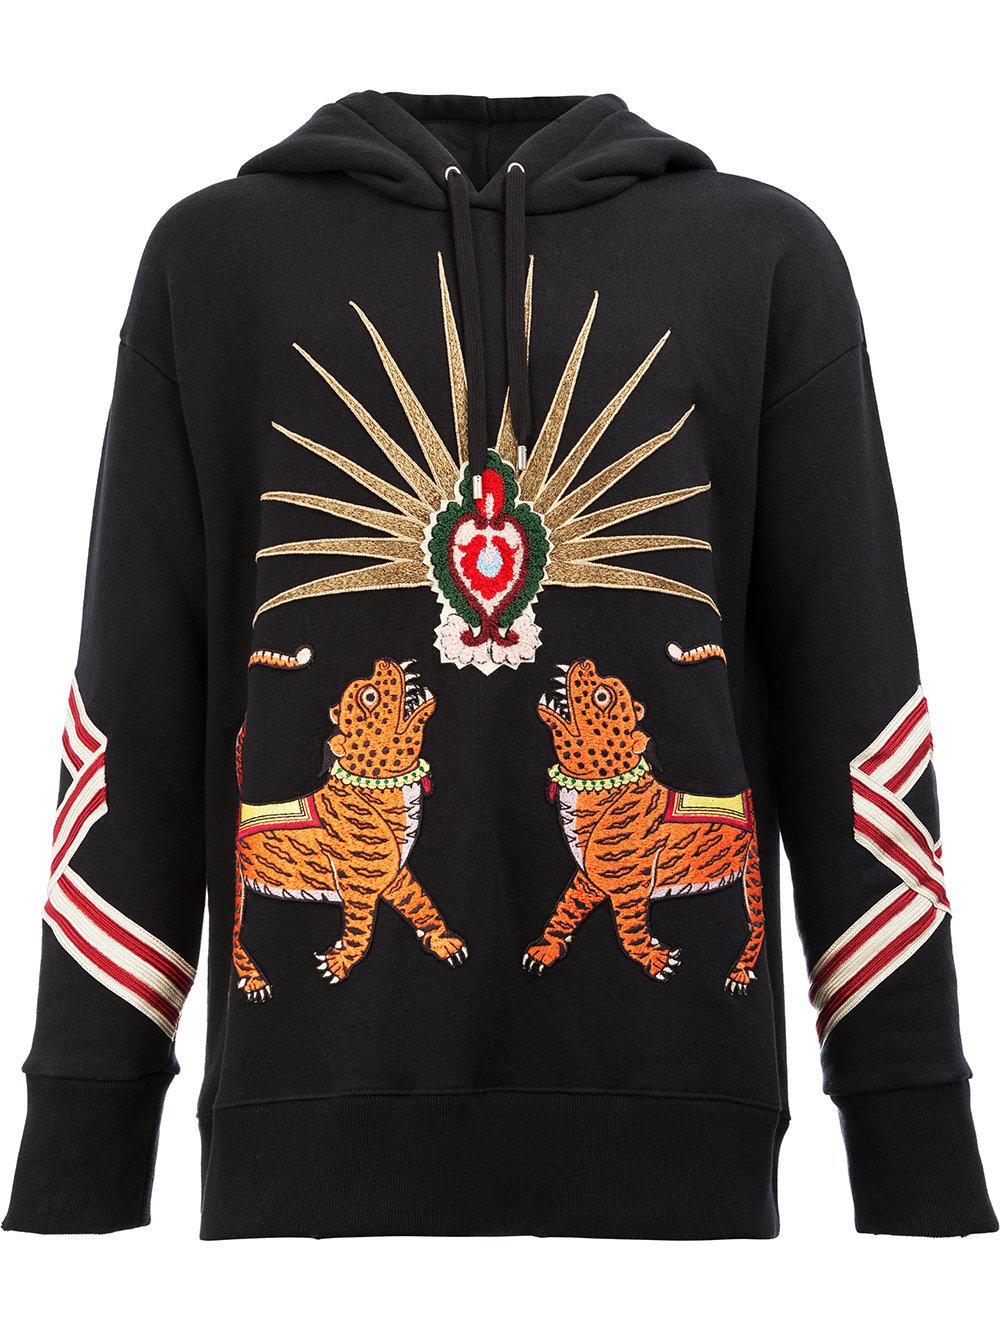 Gucci Tiger Embroidered Hooded Sweatshirt in Black for Men | Lyst